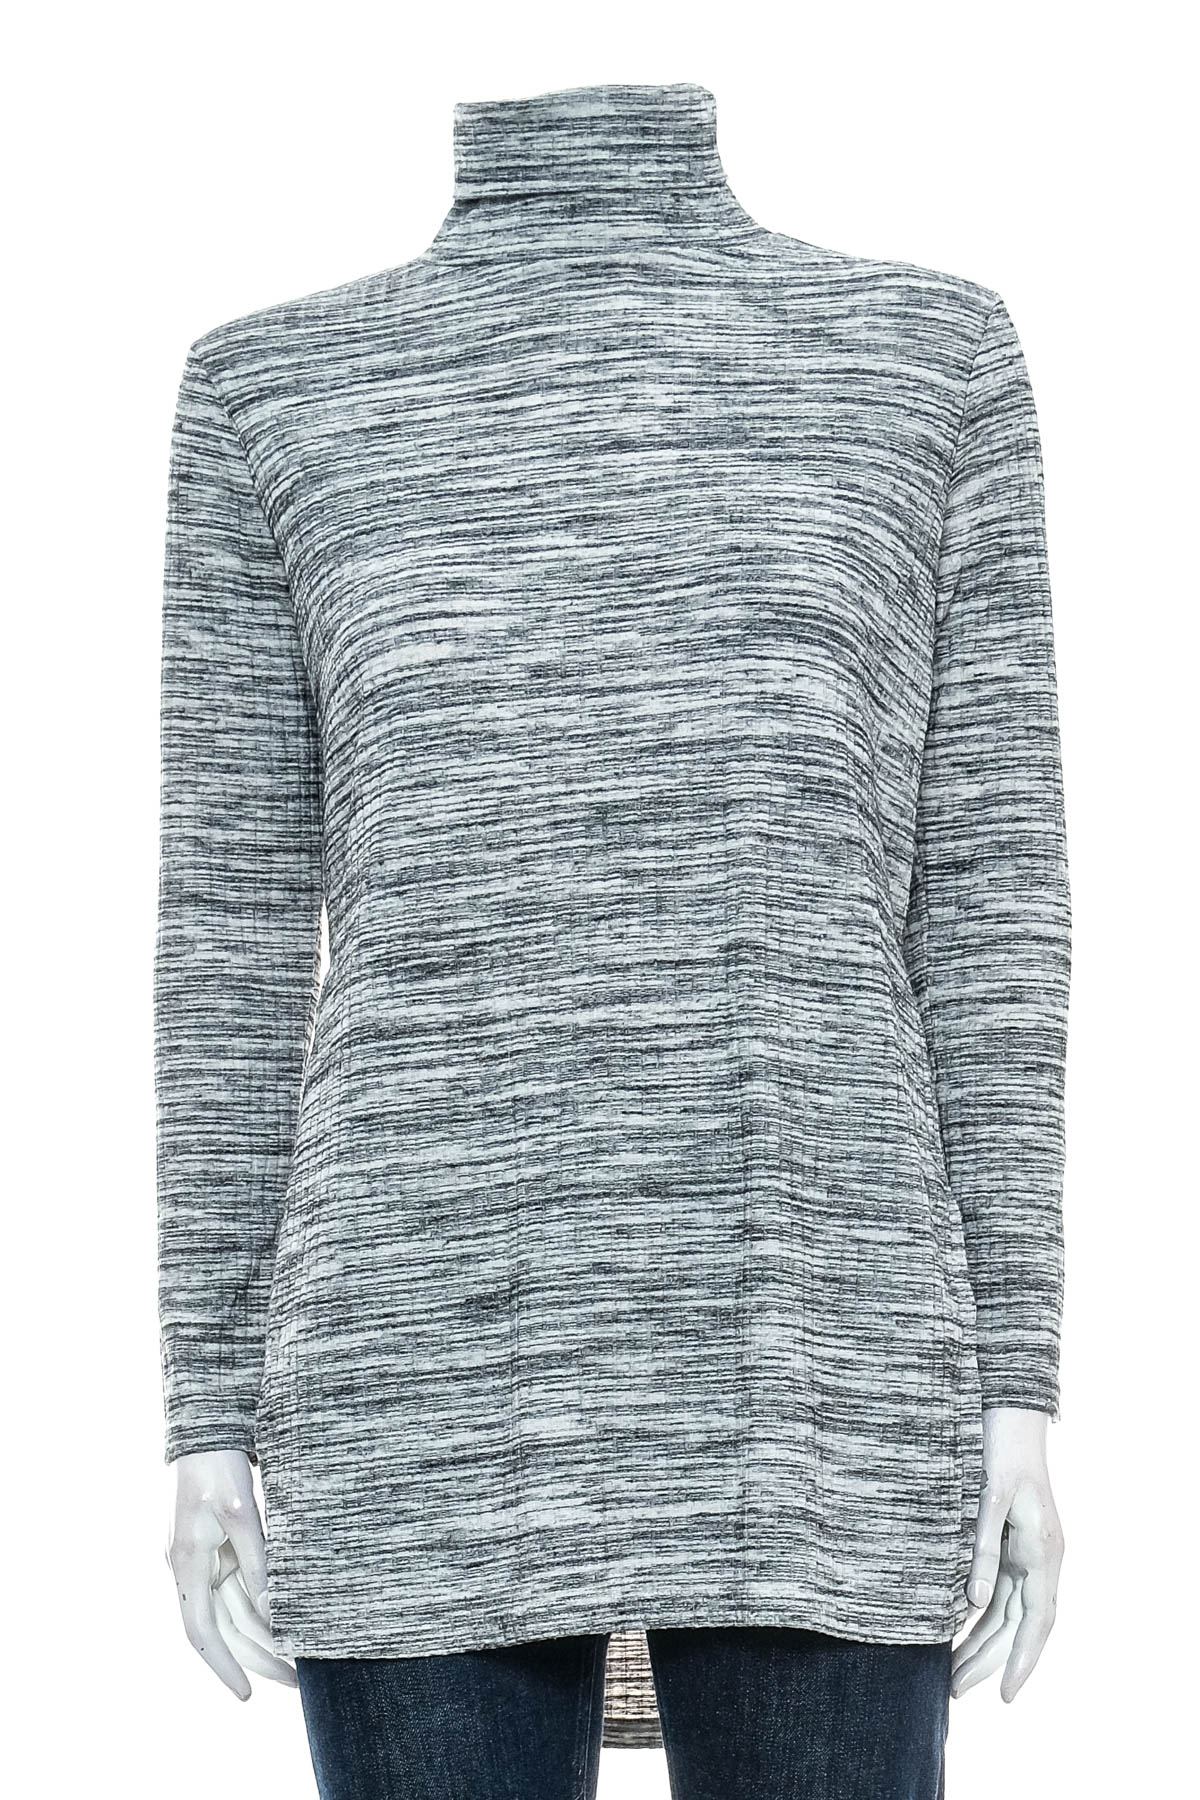 Women's tunic - DIVIDED - 0